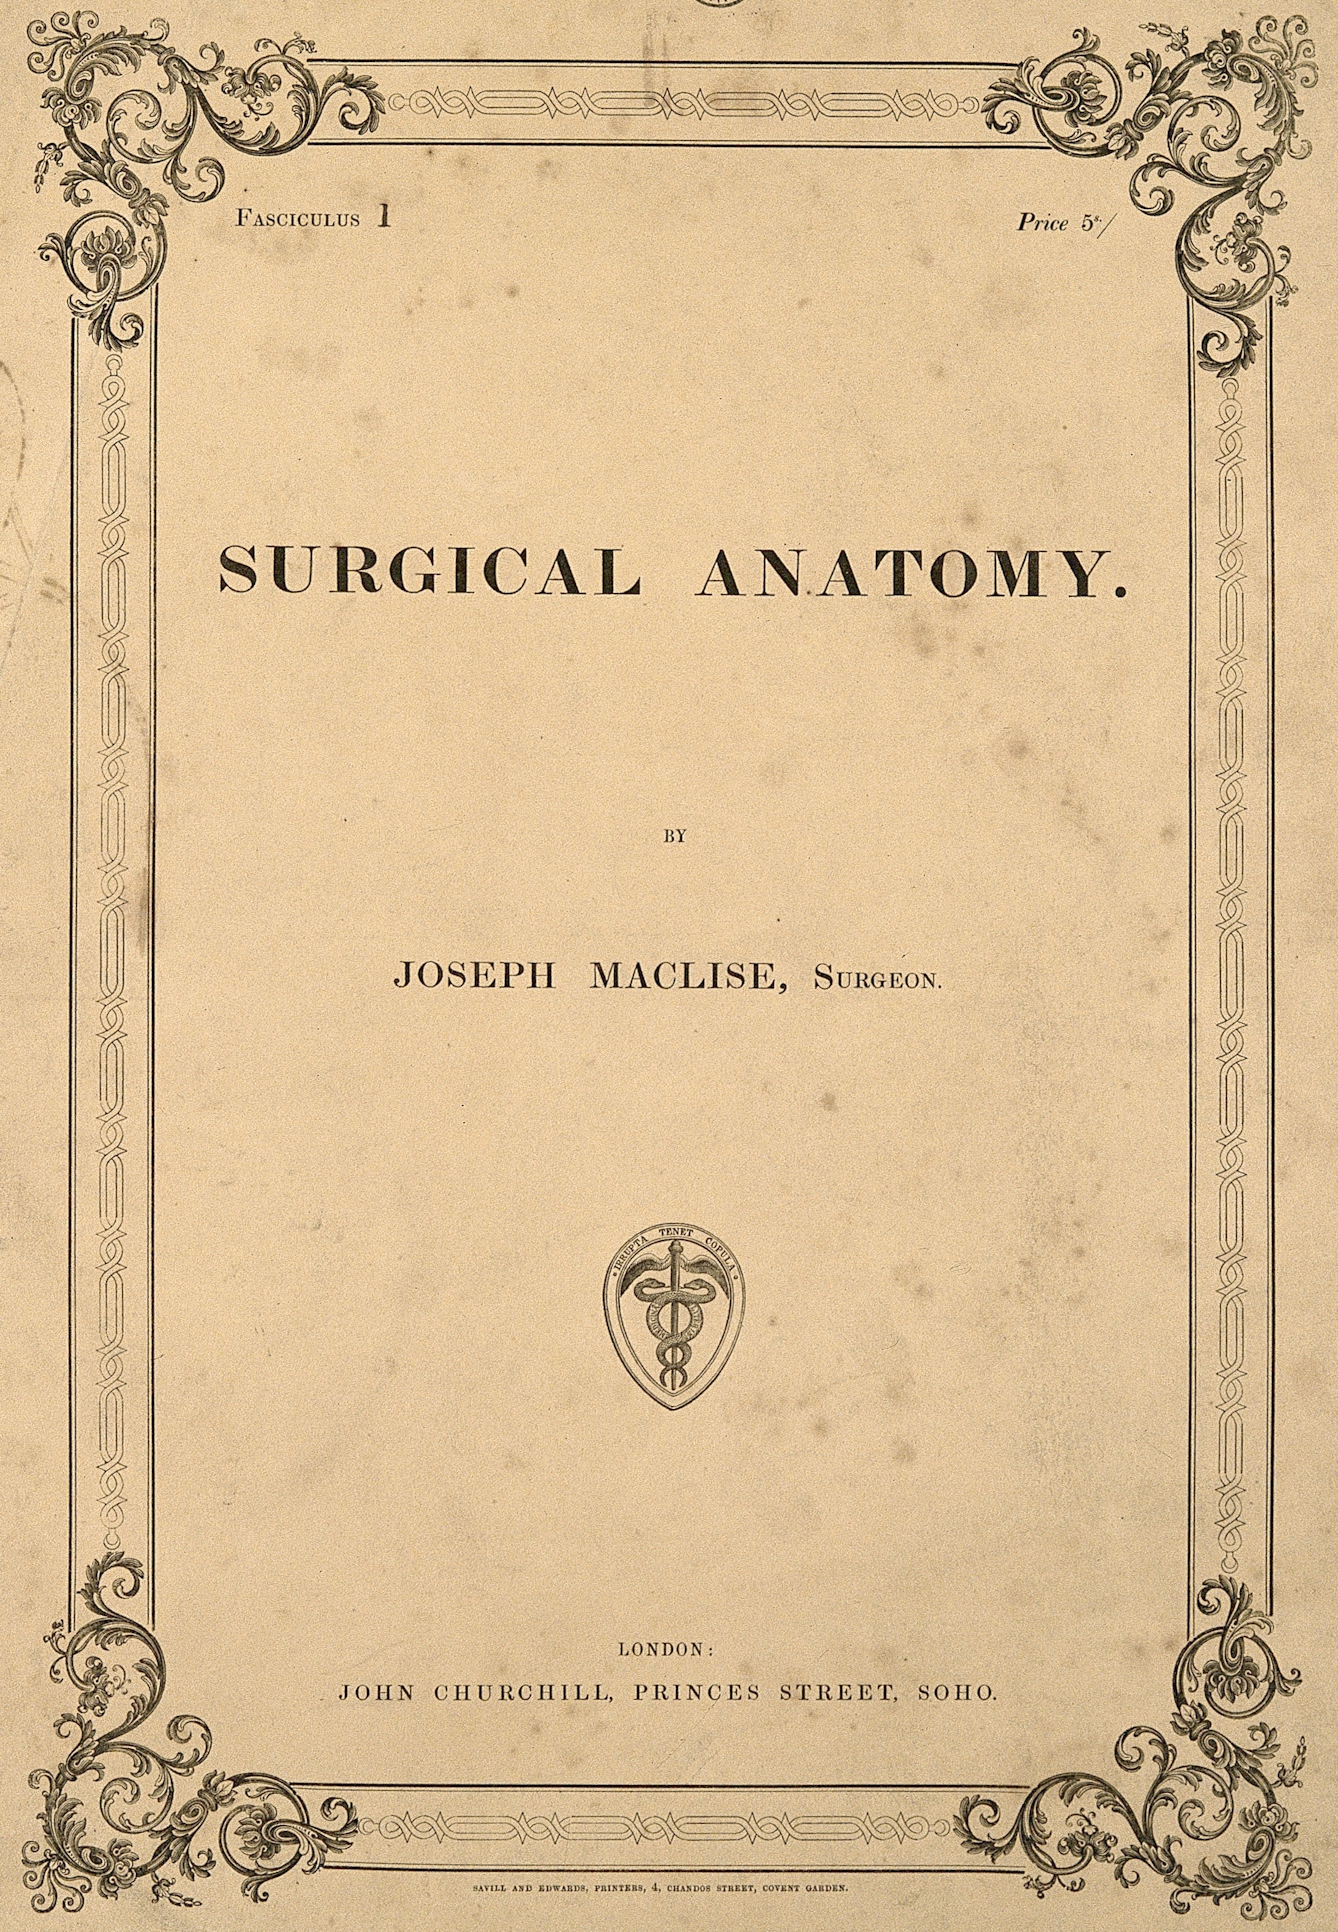 Title page of Surgical Anatomy by Joseph Maclise